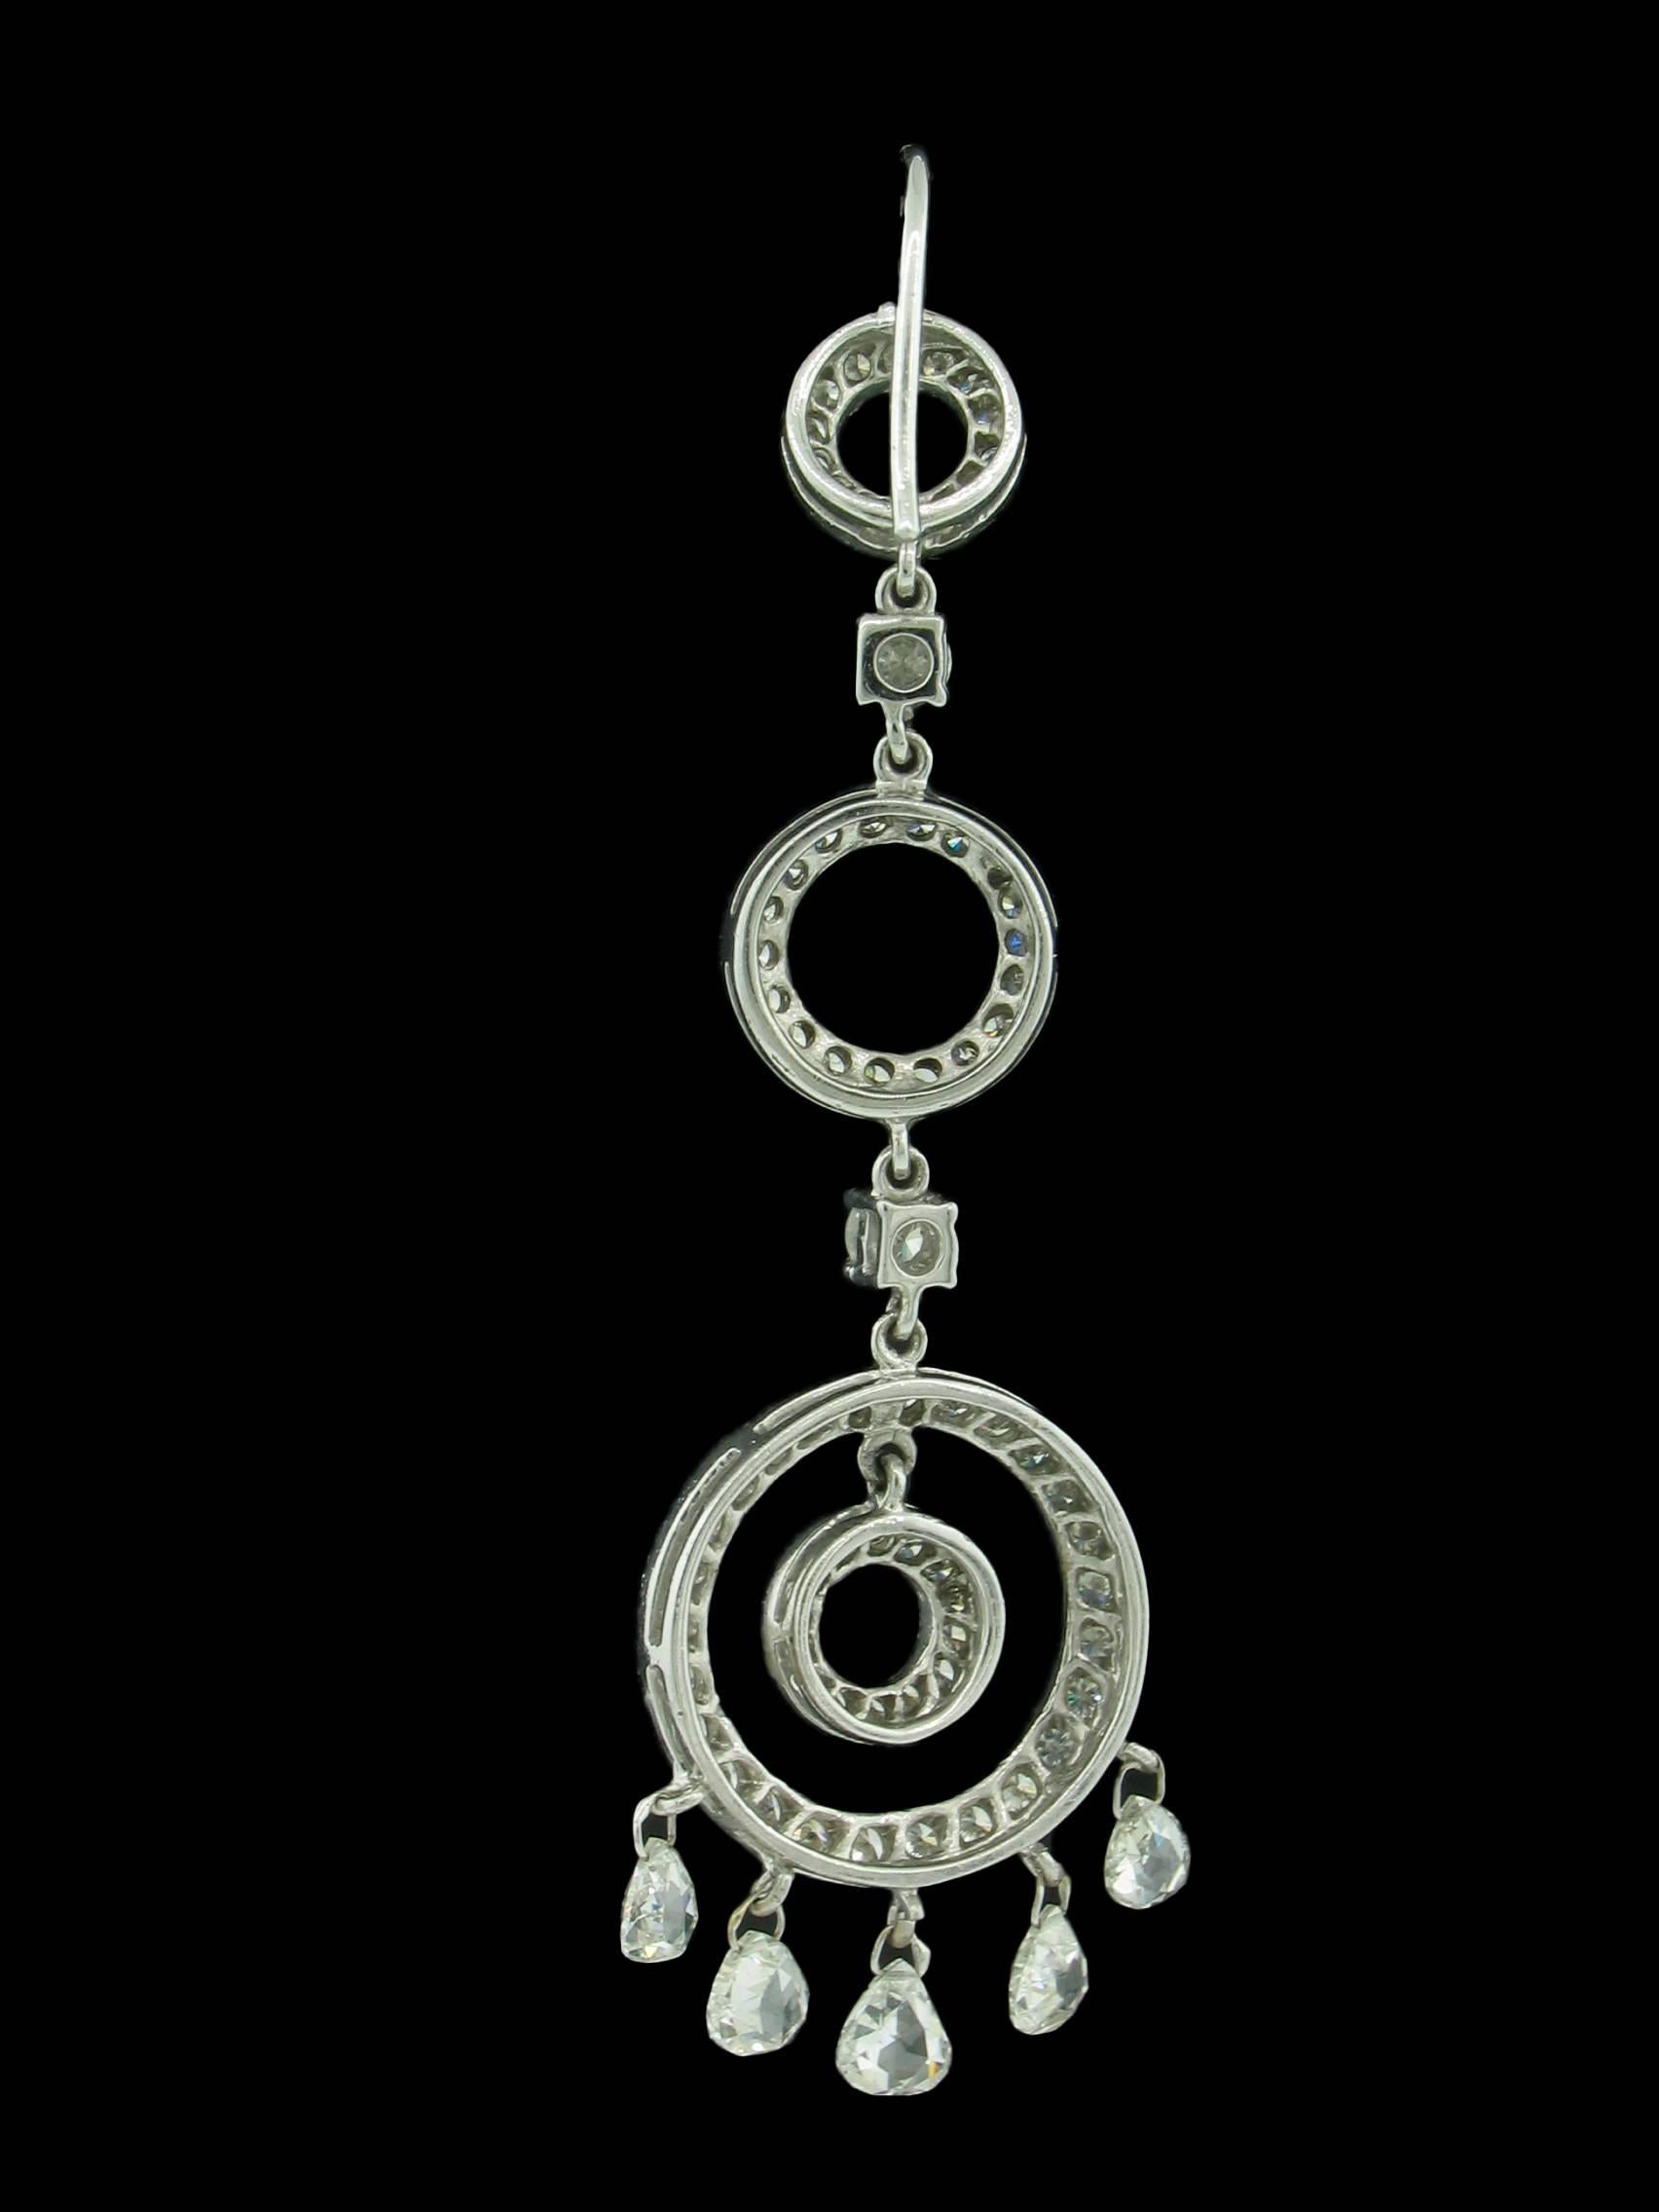 These Diamond earrings consist of 3 open circles graduating smaller to larger from top to bottom.  A smaller concentric circle is suspended inside each of the largest circles, and at the bottom of each of the largest circles are 5 briolette cut